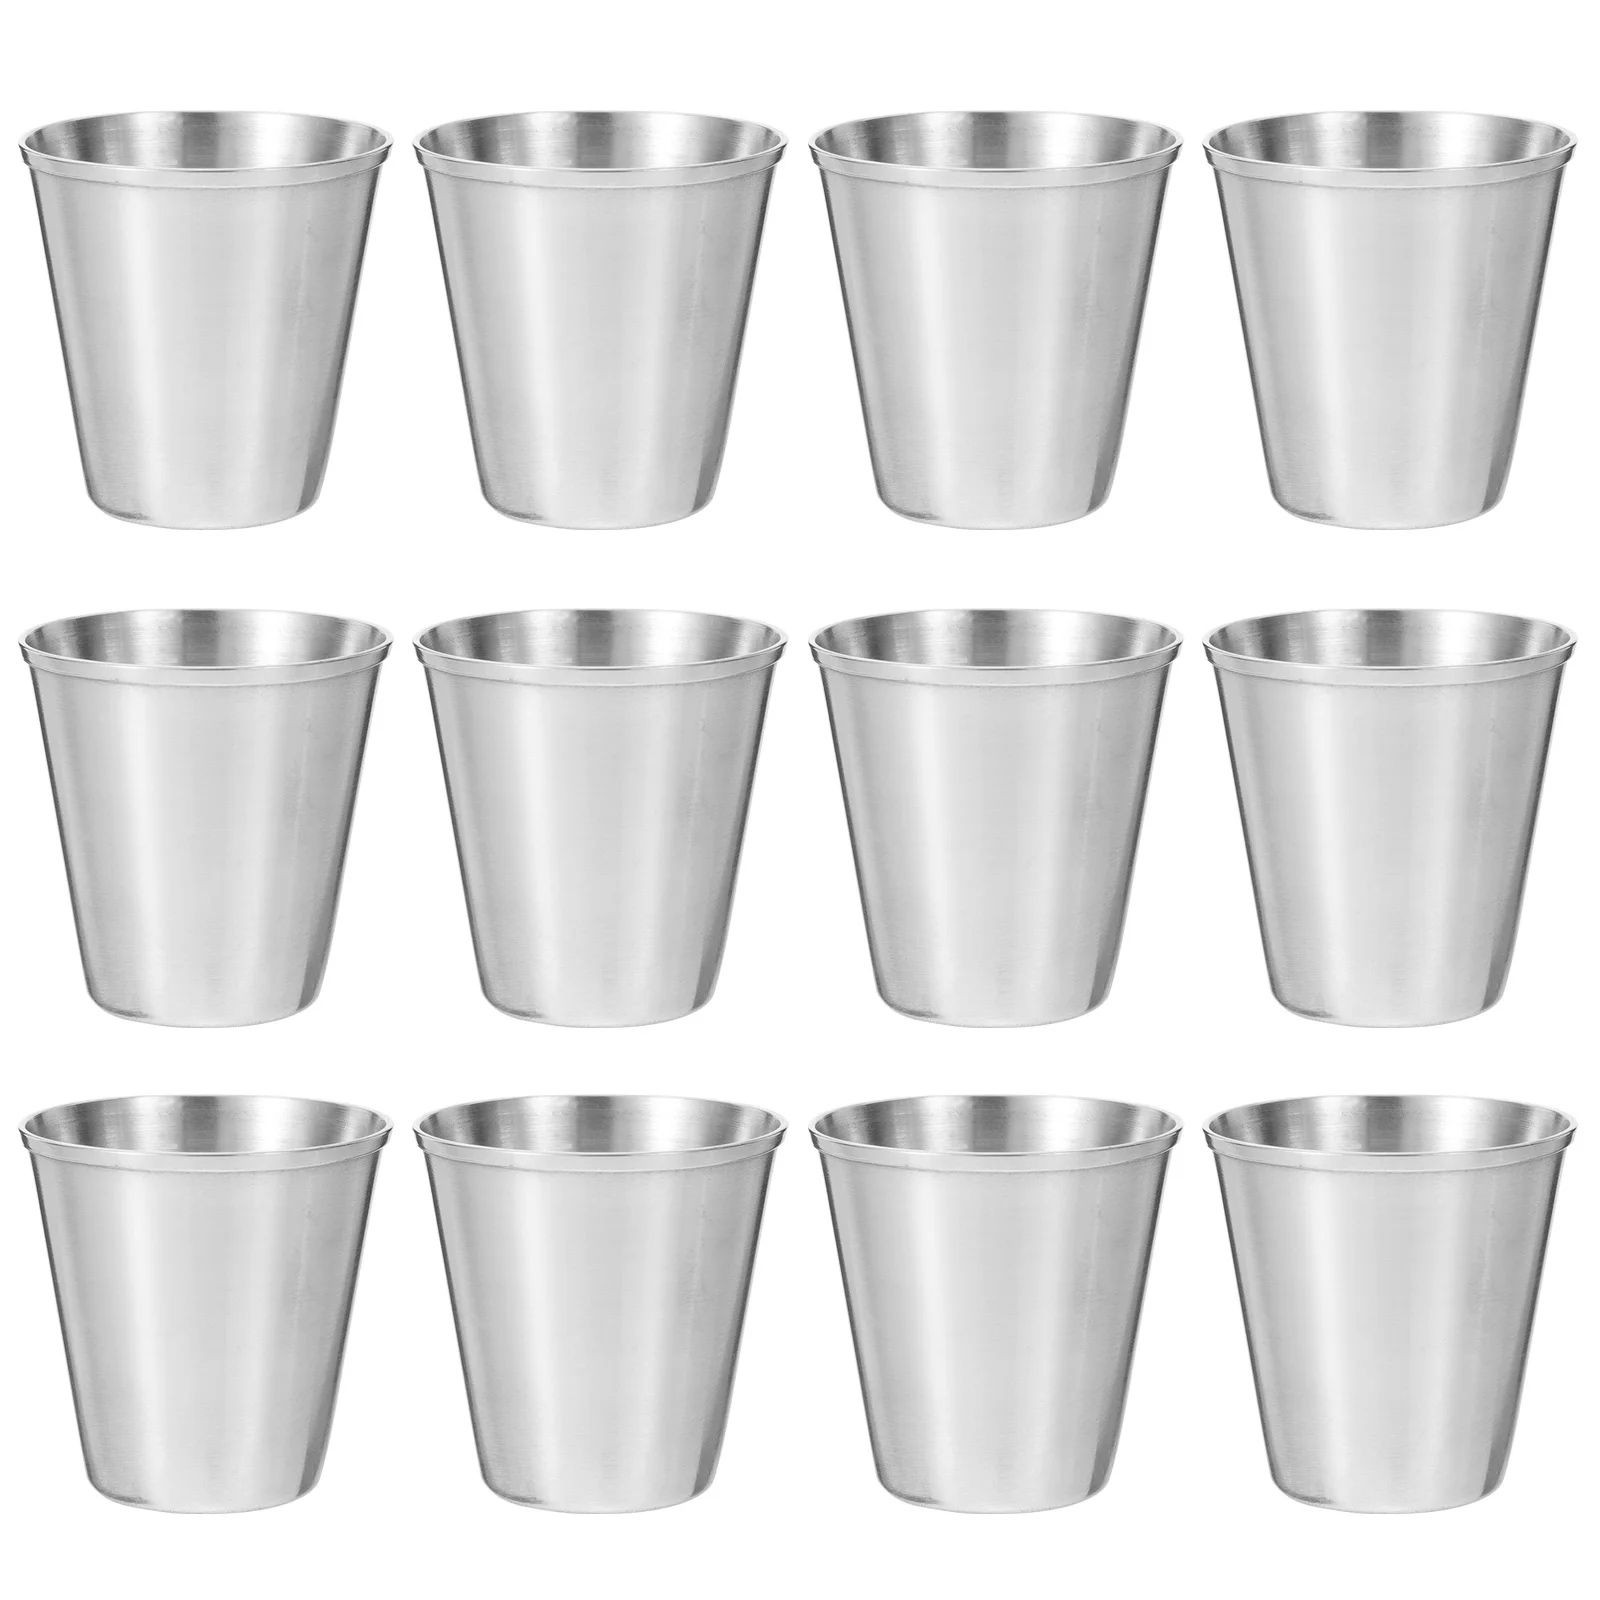 

12 Pcs Coffee Espresso Christmas Dip Bowl Tumbler Stainless Steel Shot Cups Drinking Shot Glasses Shot Glass Child